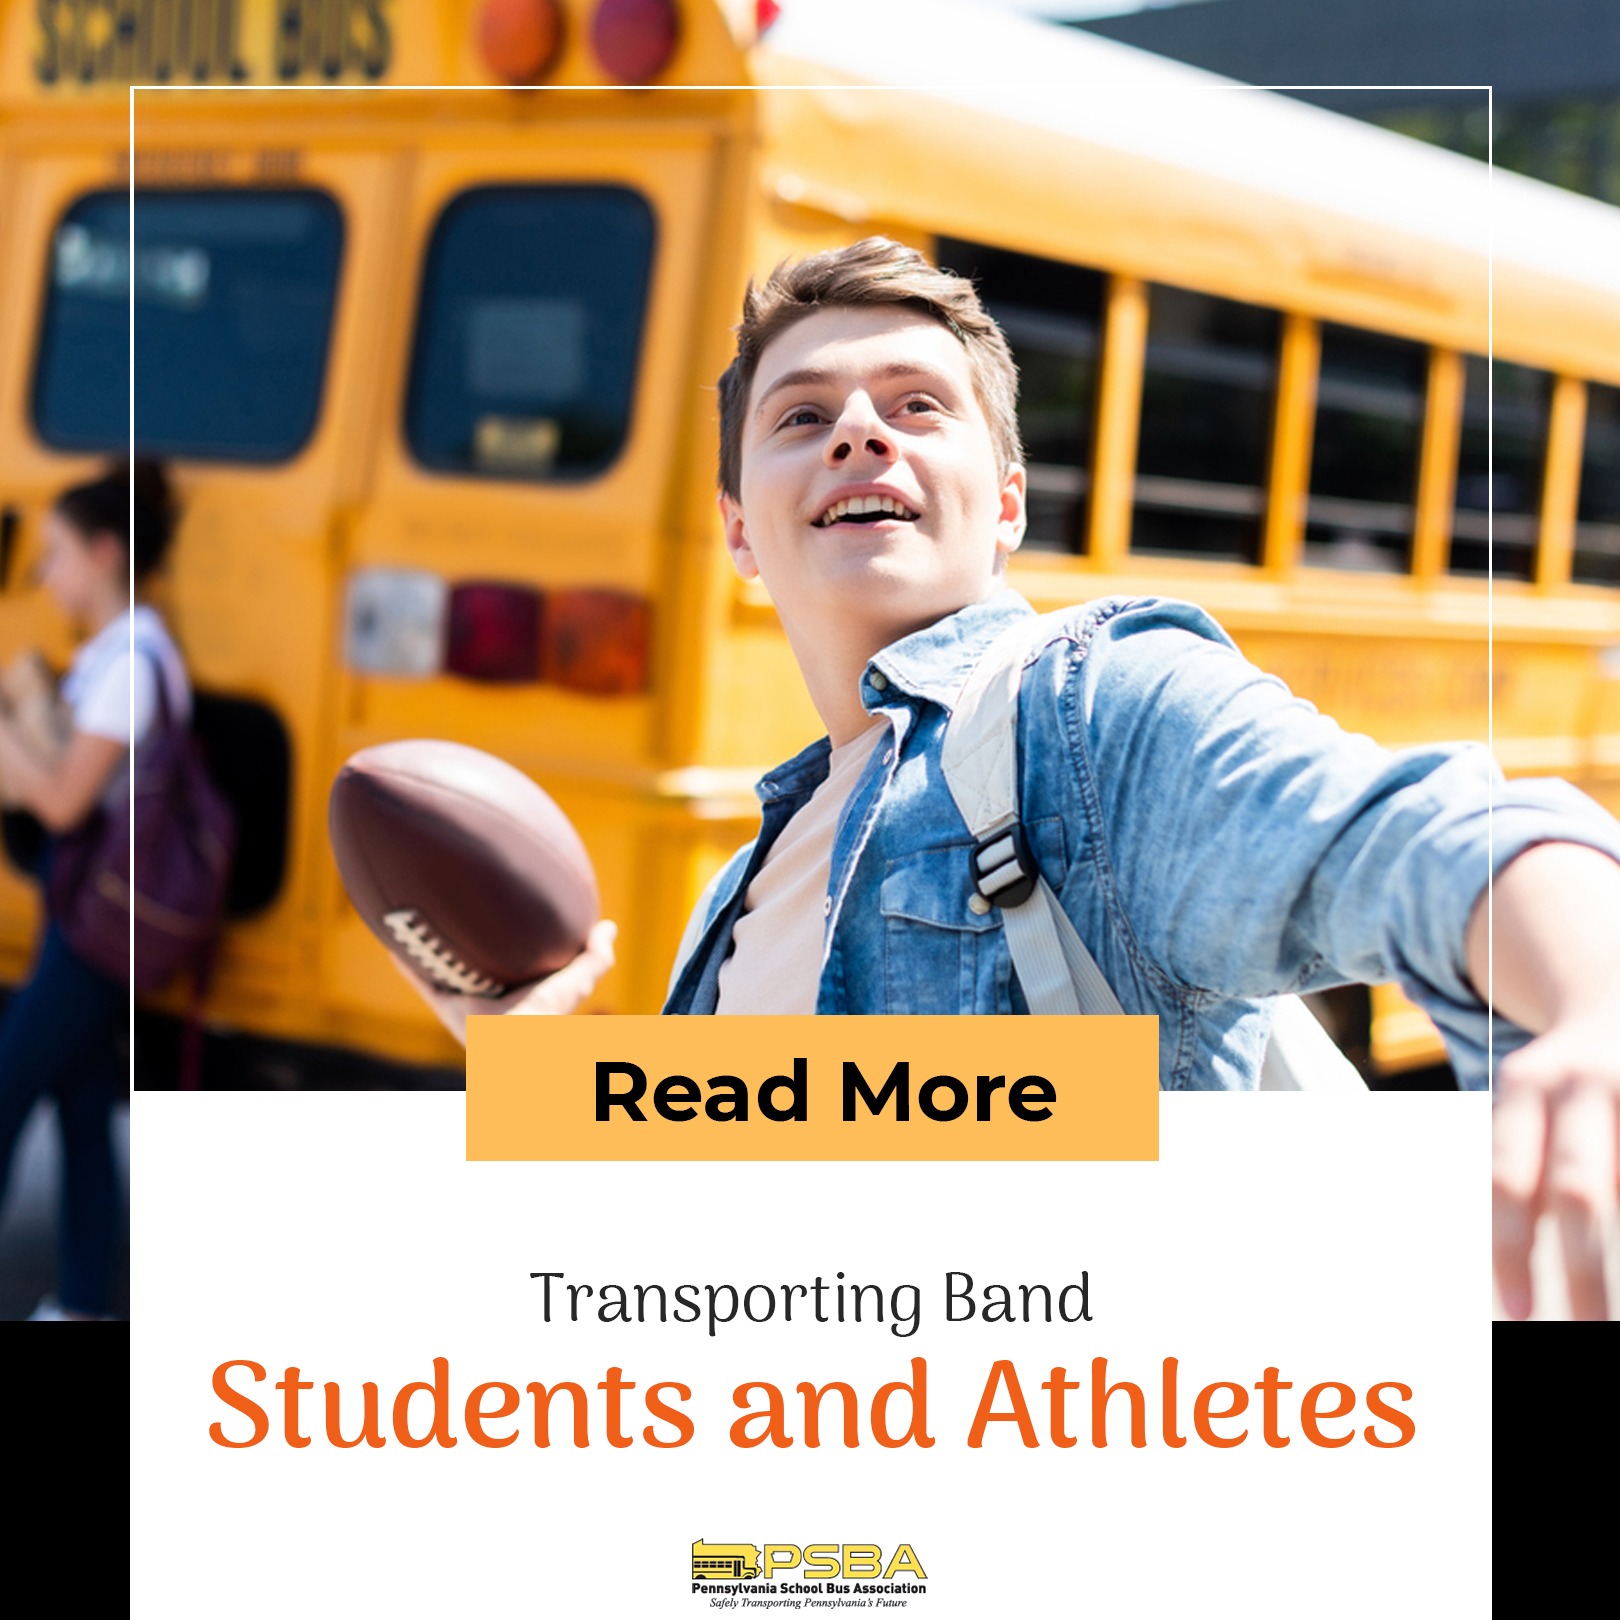 Transporting Band Students and Athletes